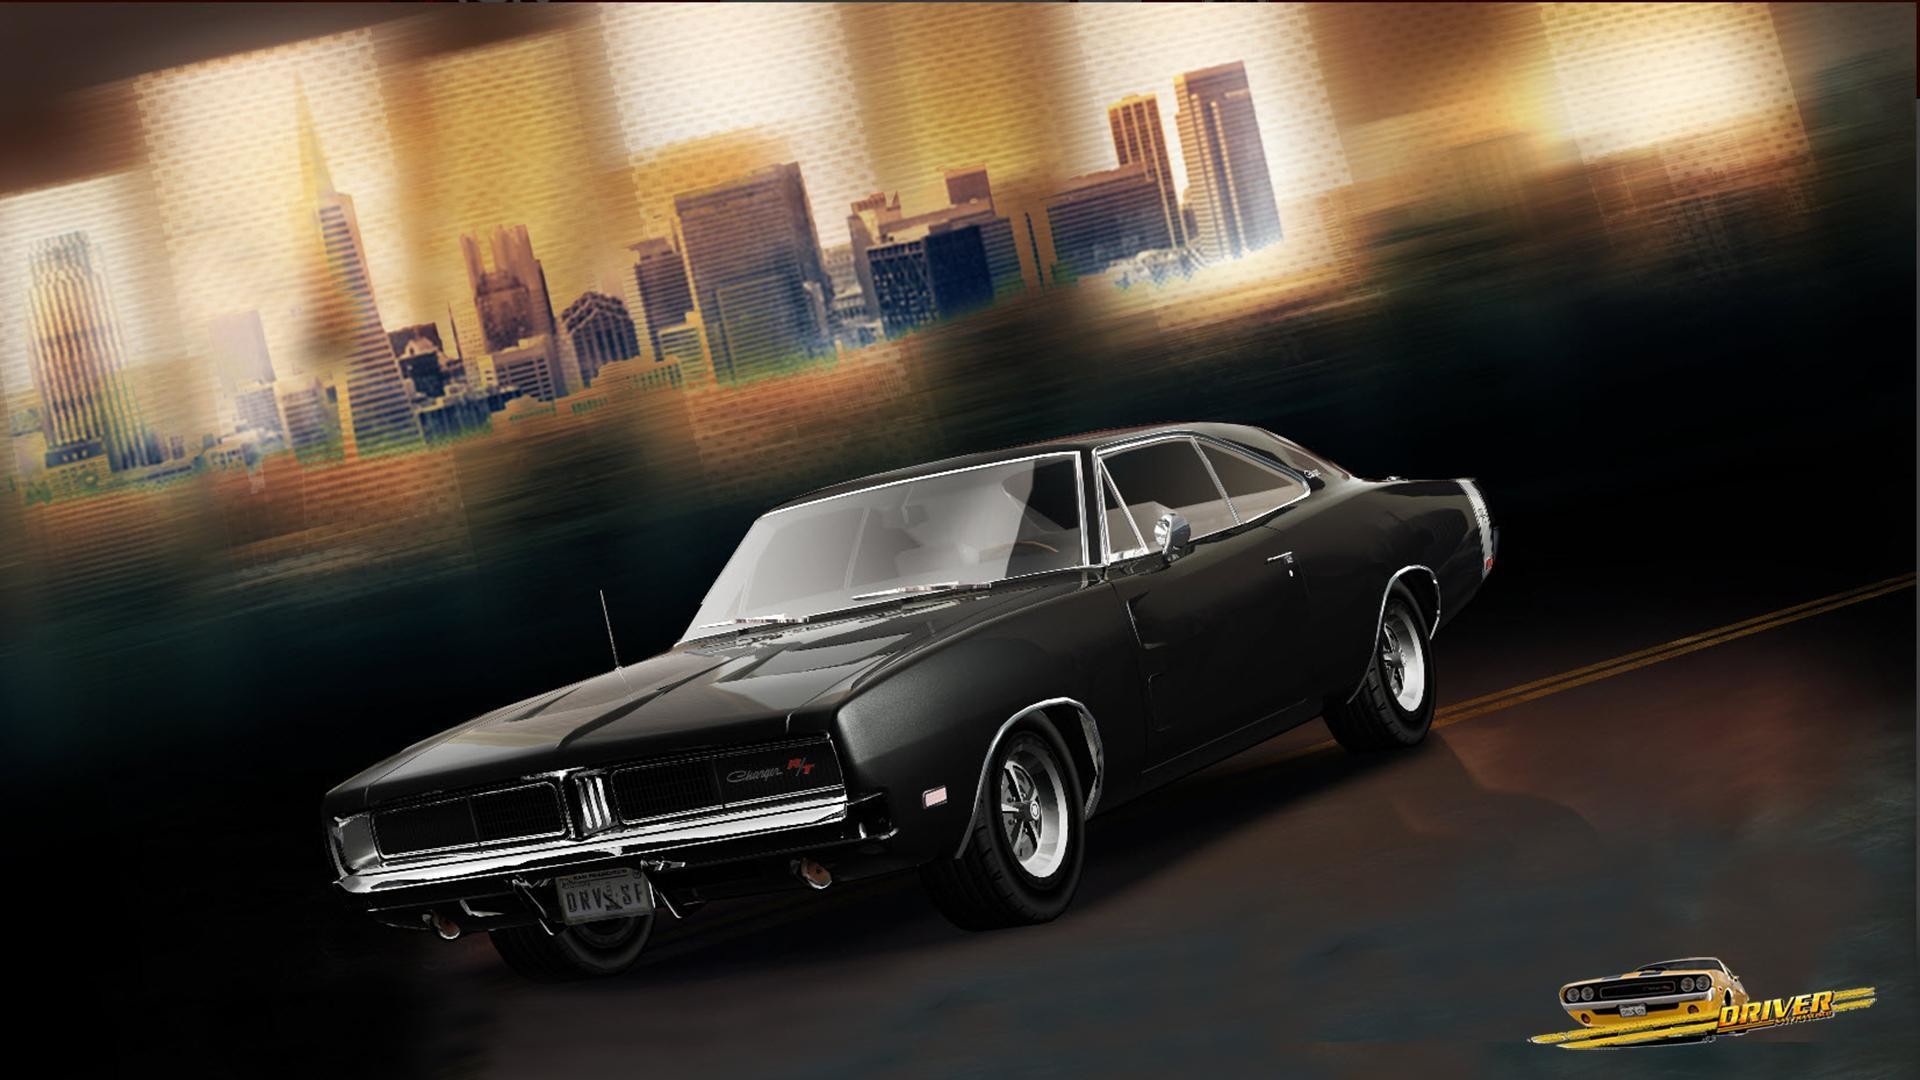 69 dodge charger wallpaper